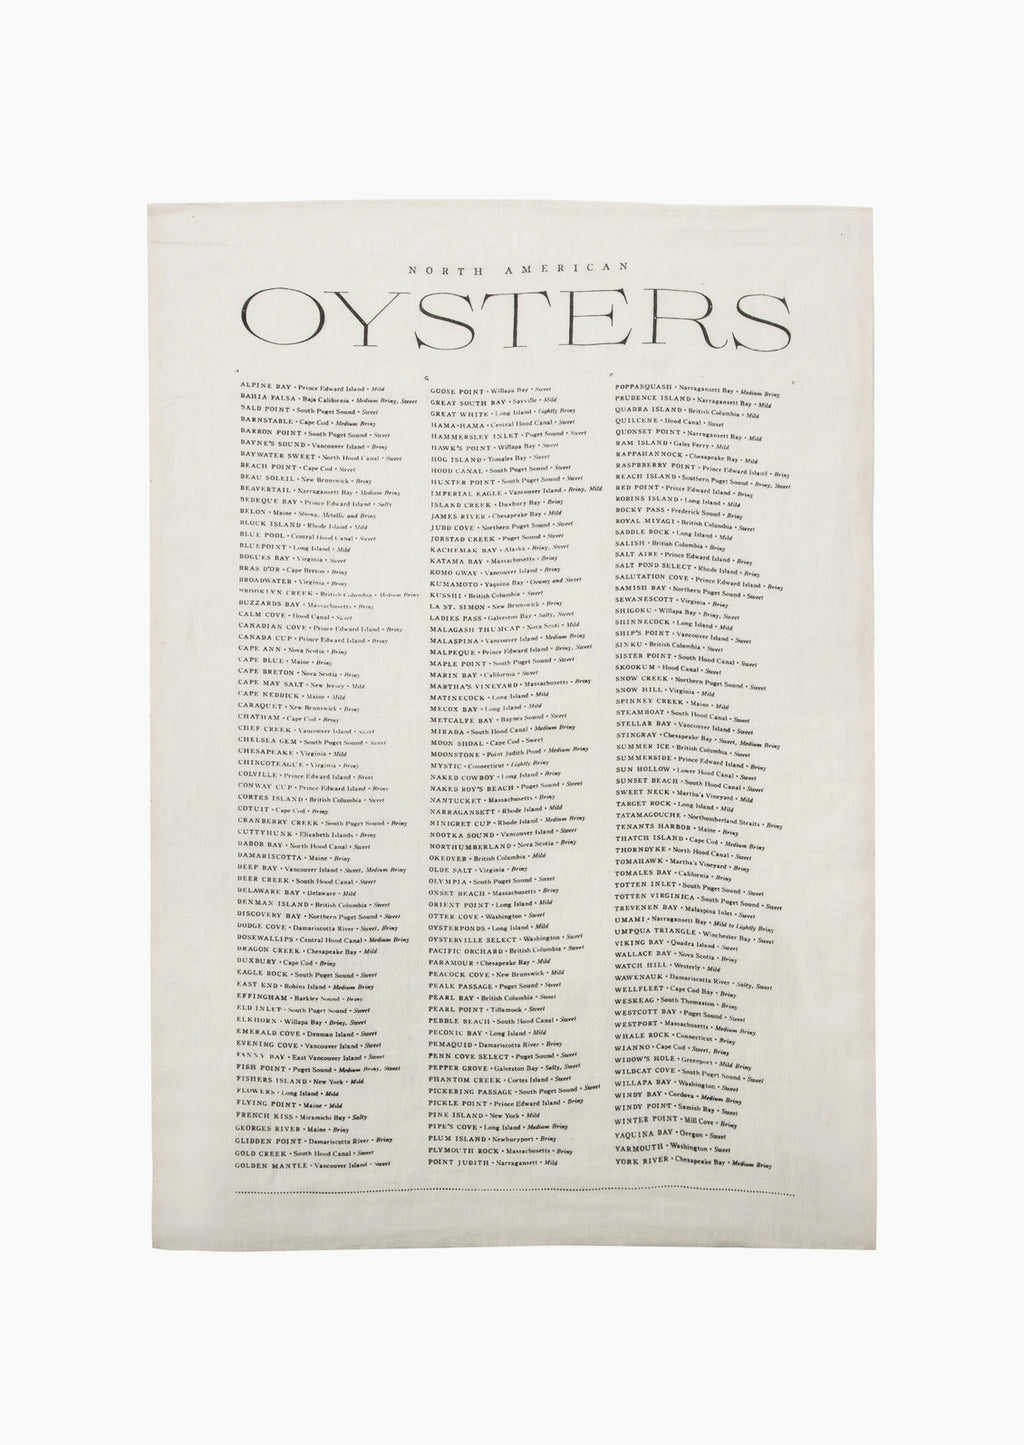 2: A tea towel with long lists of oyster types.